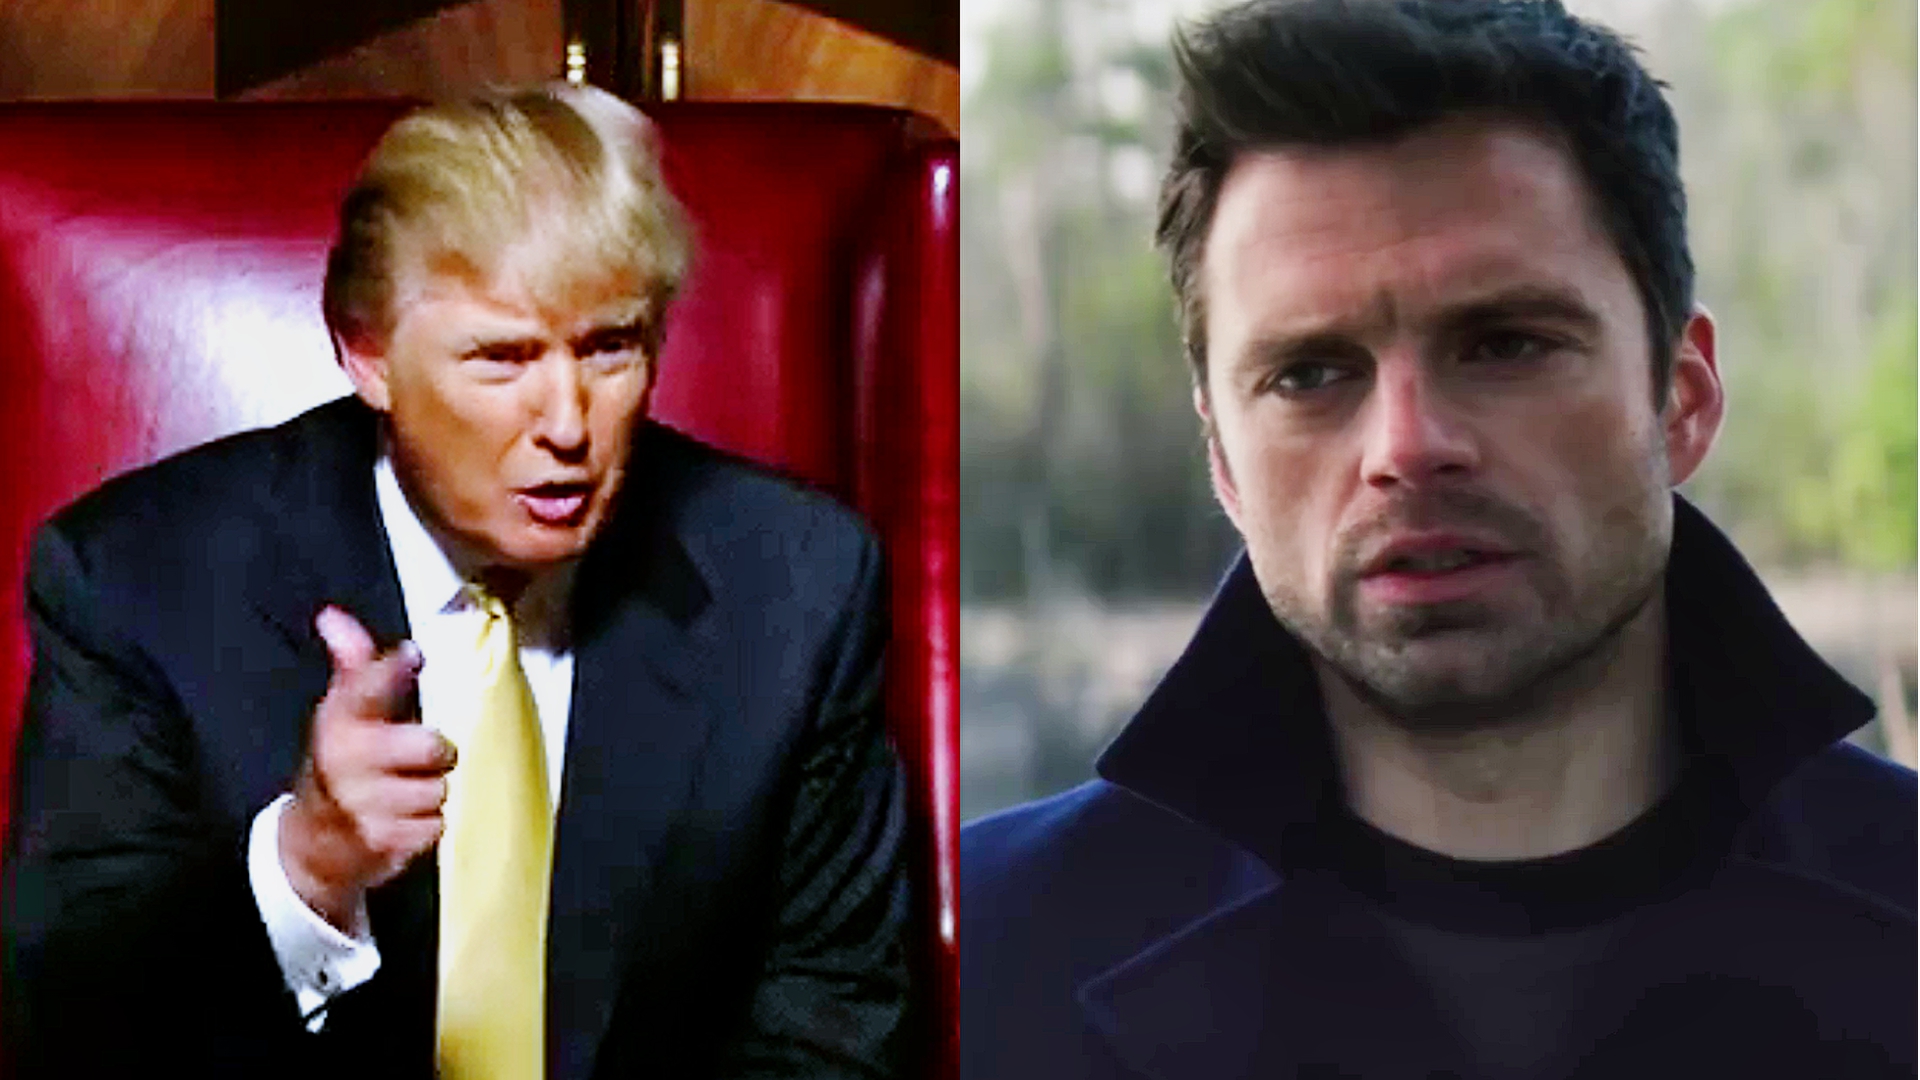 This Happened- Trump Will Be Played By Marvel Superhero Actor Sebastian Stan In 'Apprentice' Movie